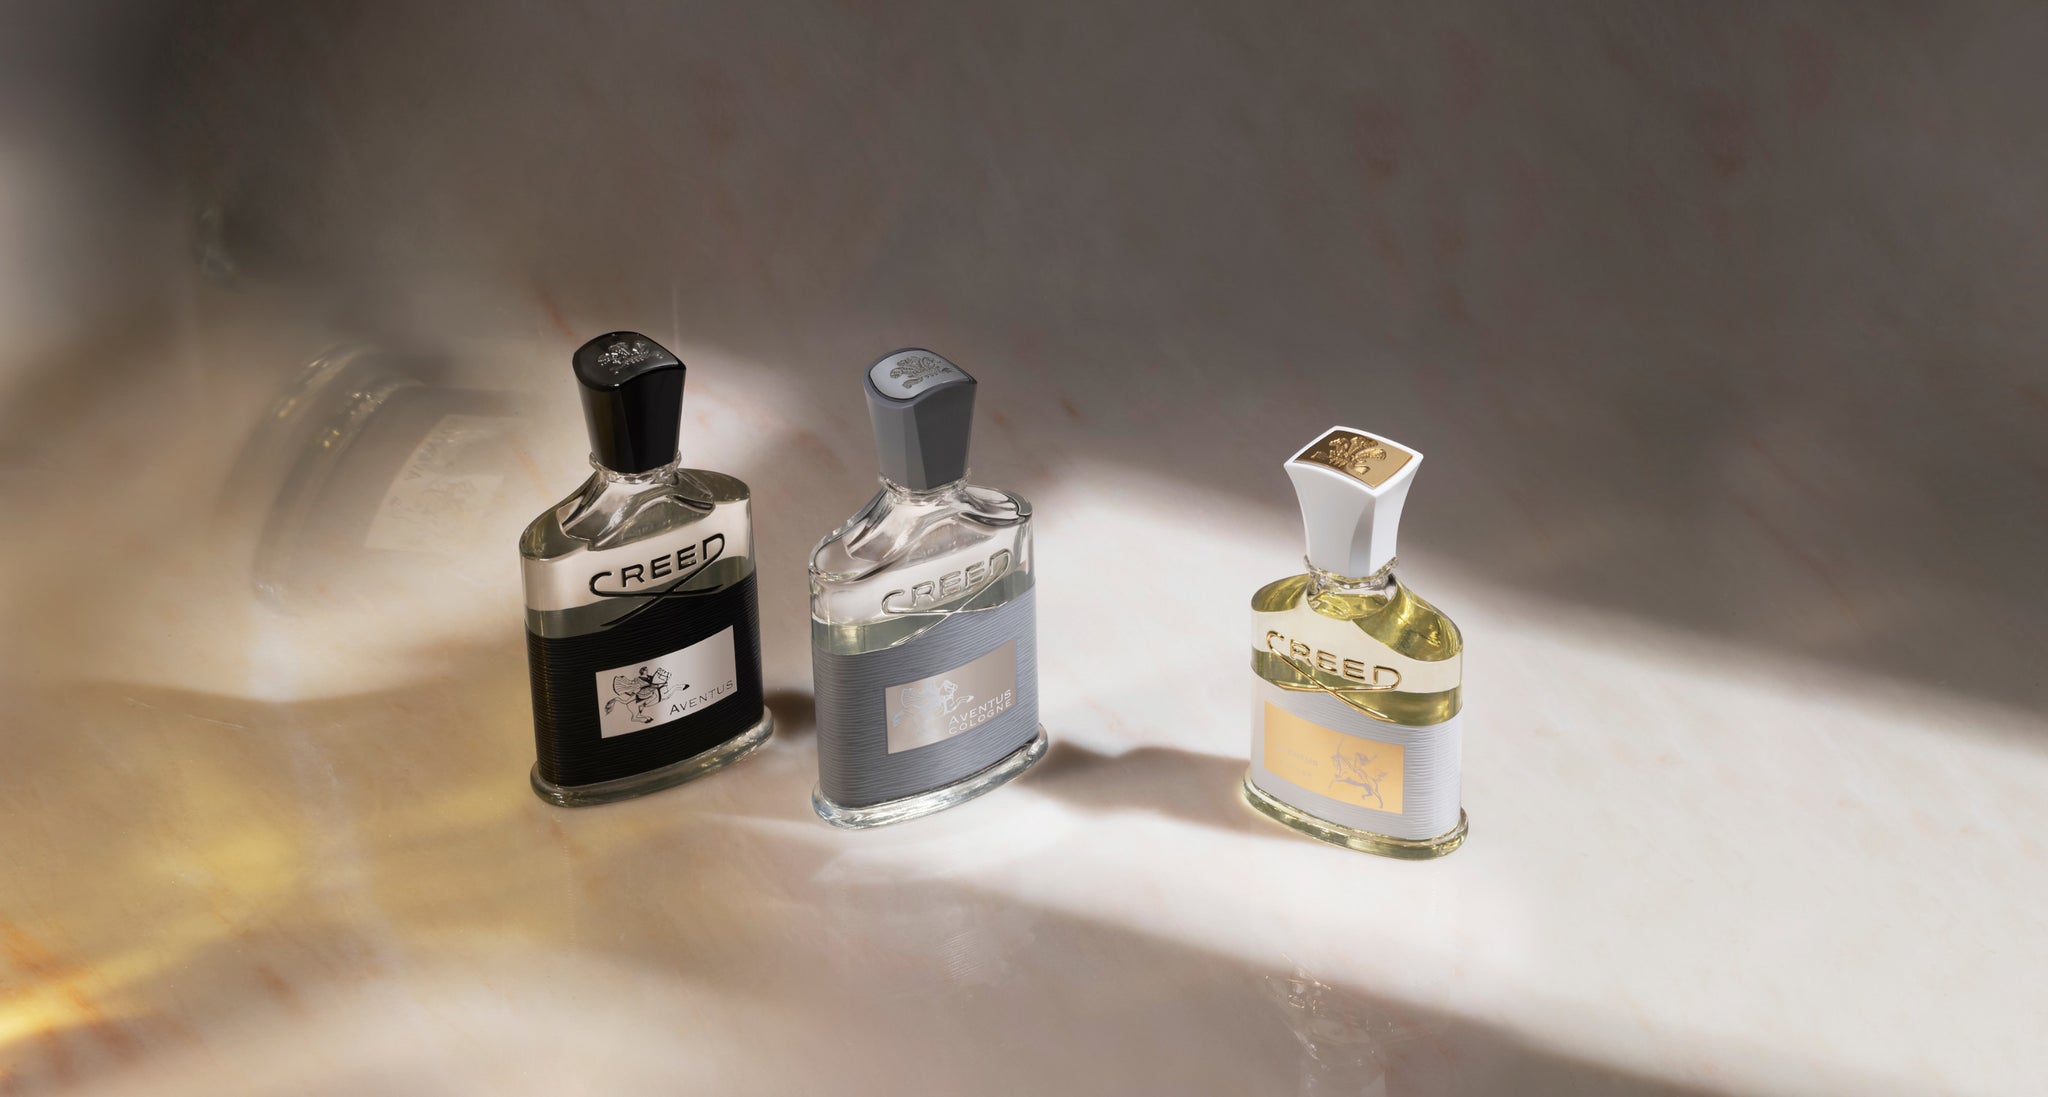 Aventus Trilogy - Aventus, Aventus Cologne and Aventus For Her Bottles